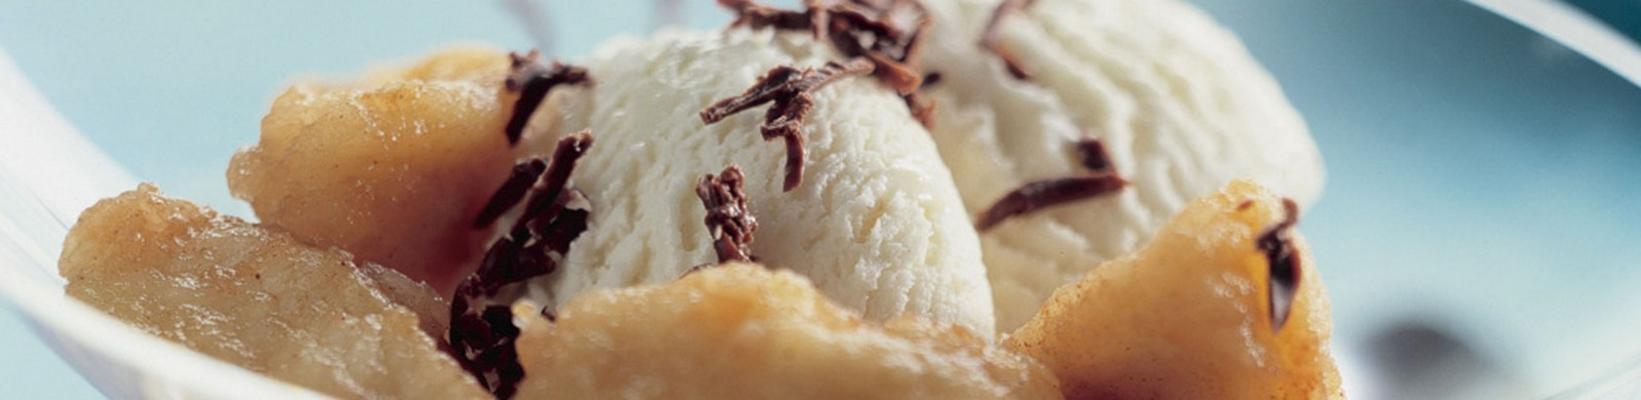 vanilla ice cream with stewed apples and chocolate